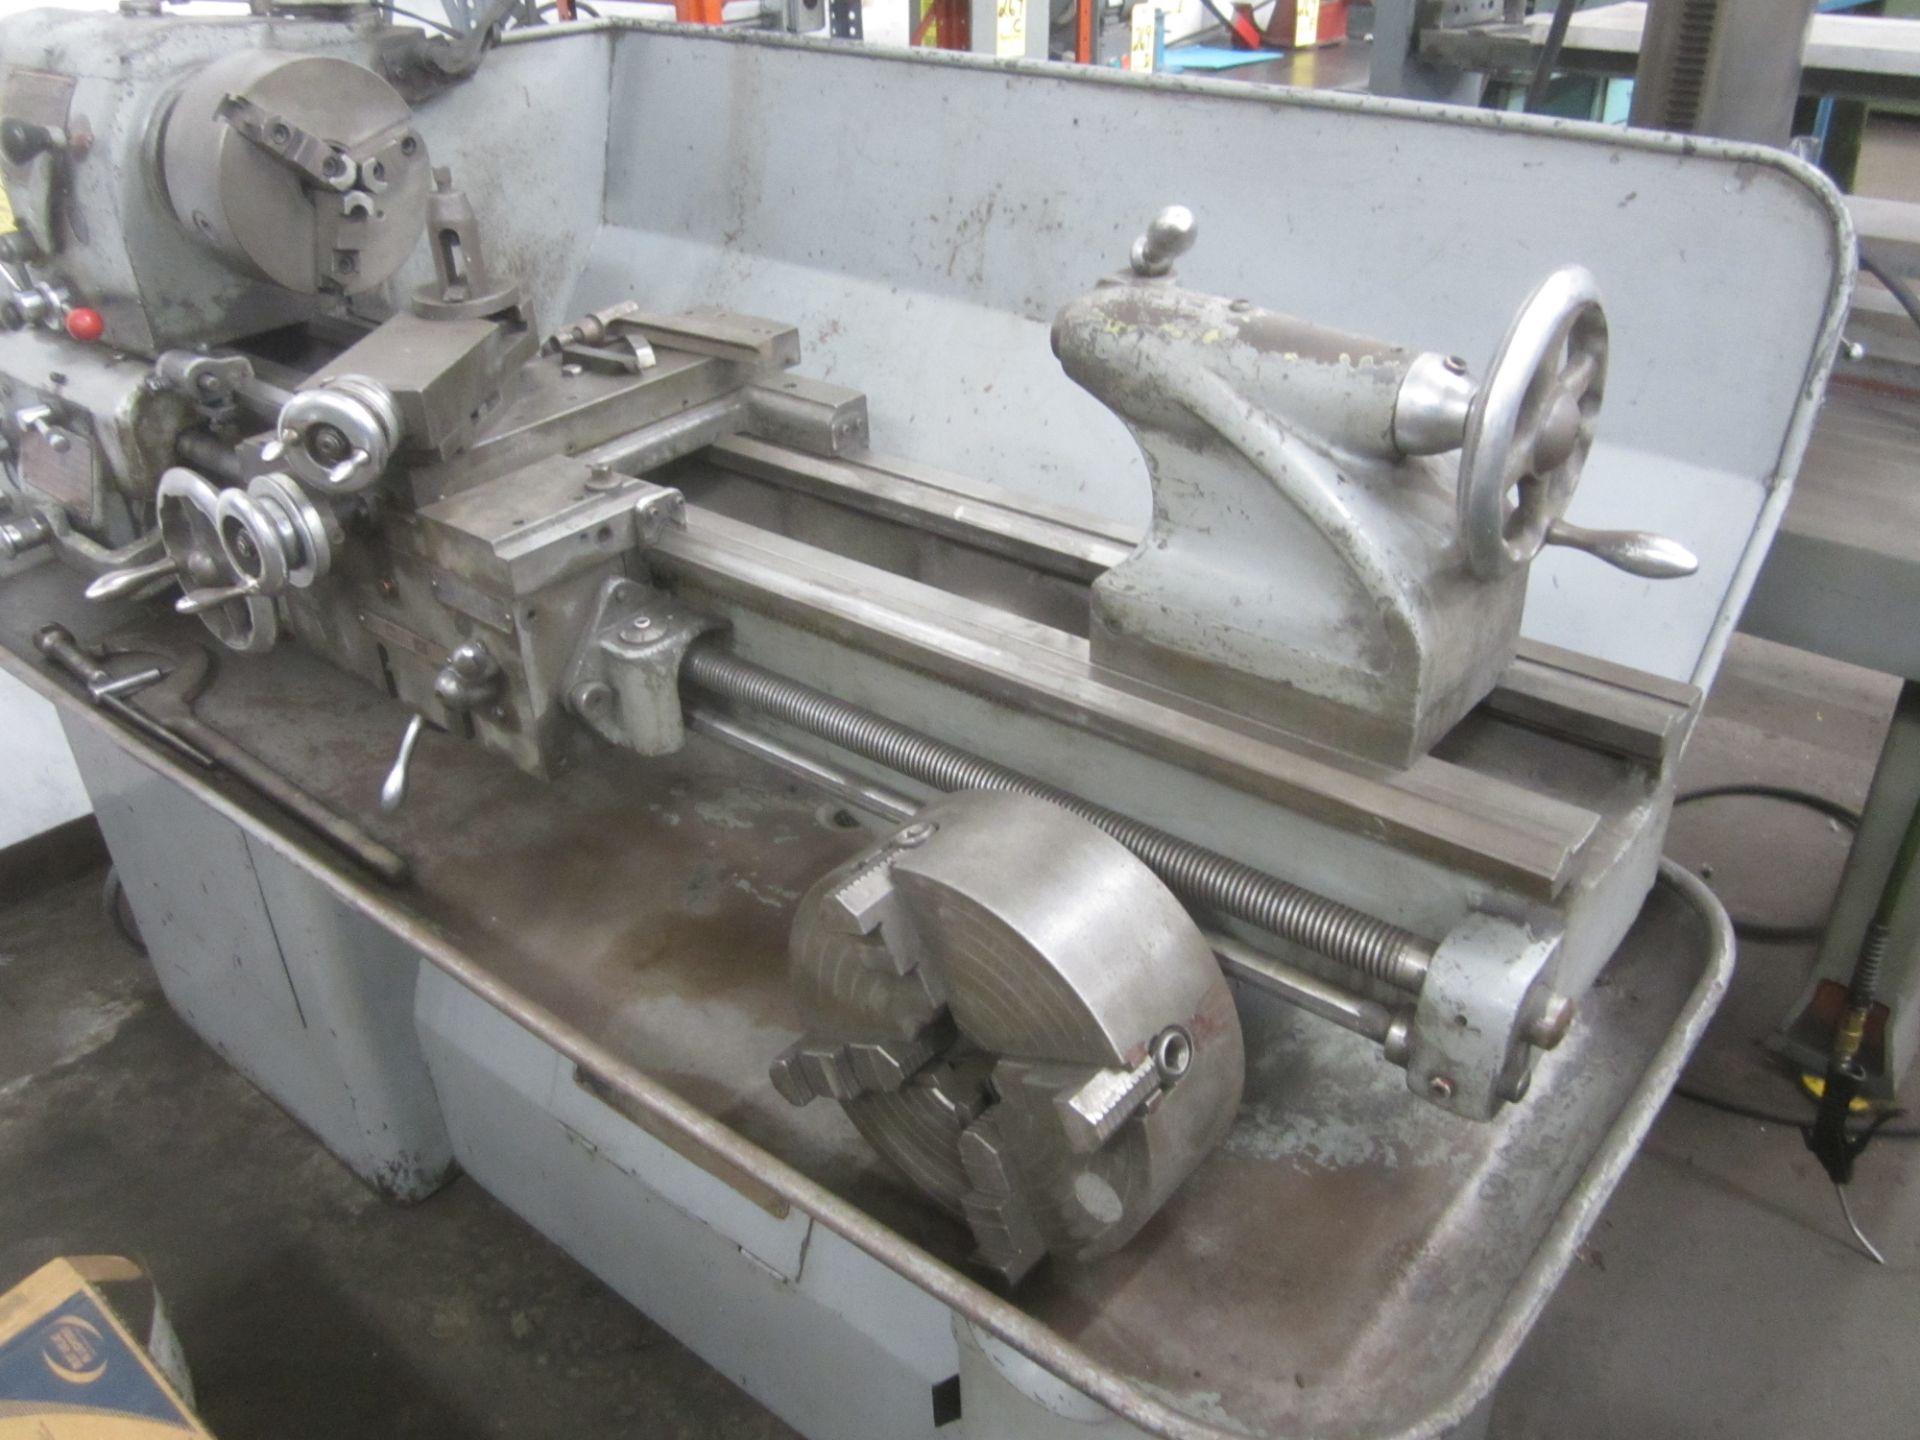 Clausing Colchester 13" X 36" Engine Lathe, s/n 3/34592, 8" 3-Jaw Chuck, 10" 4-Jaw Chuck, Round - Image 3 of 6